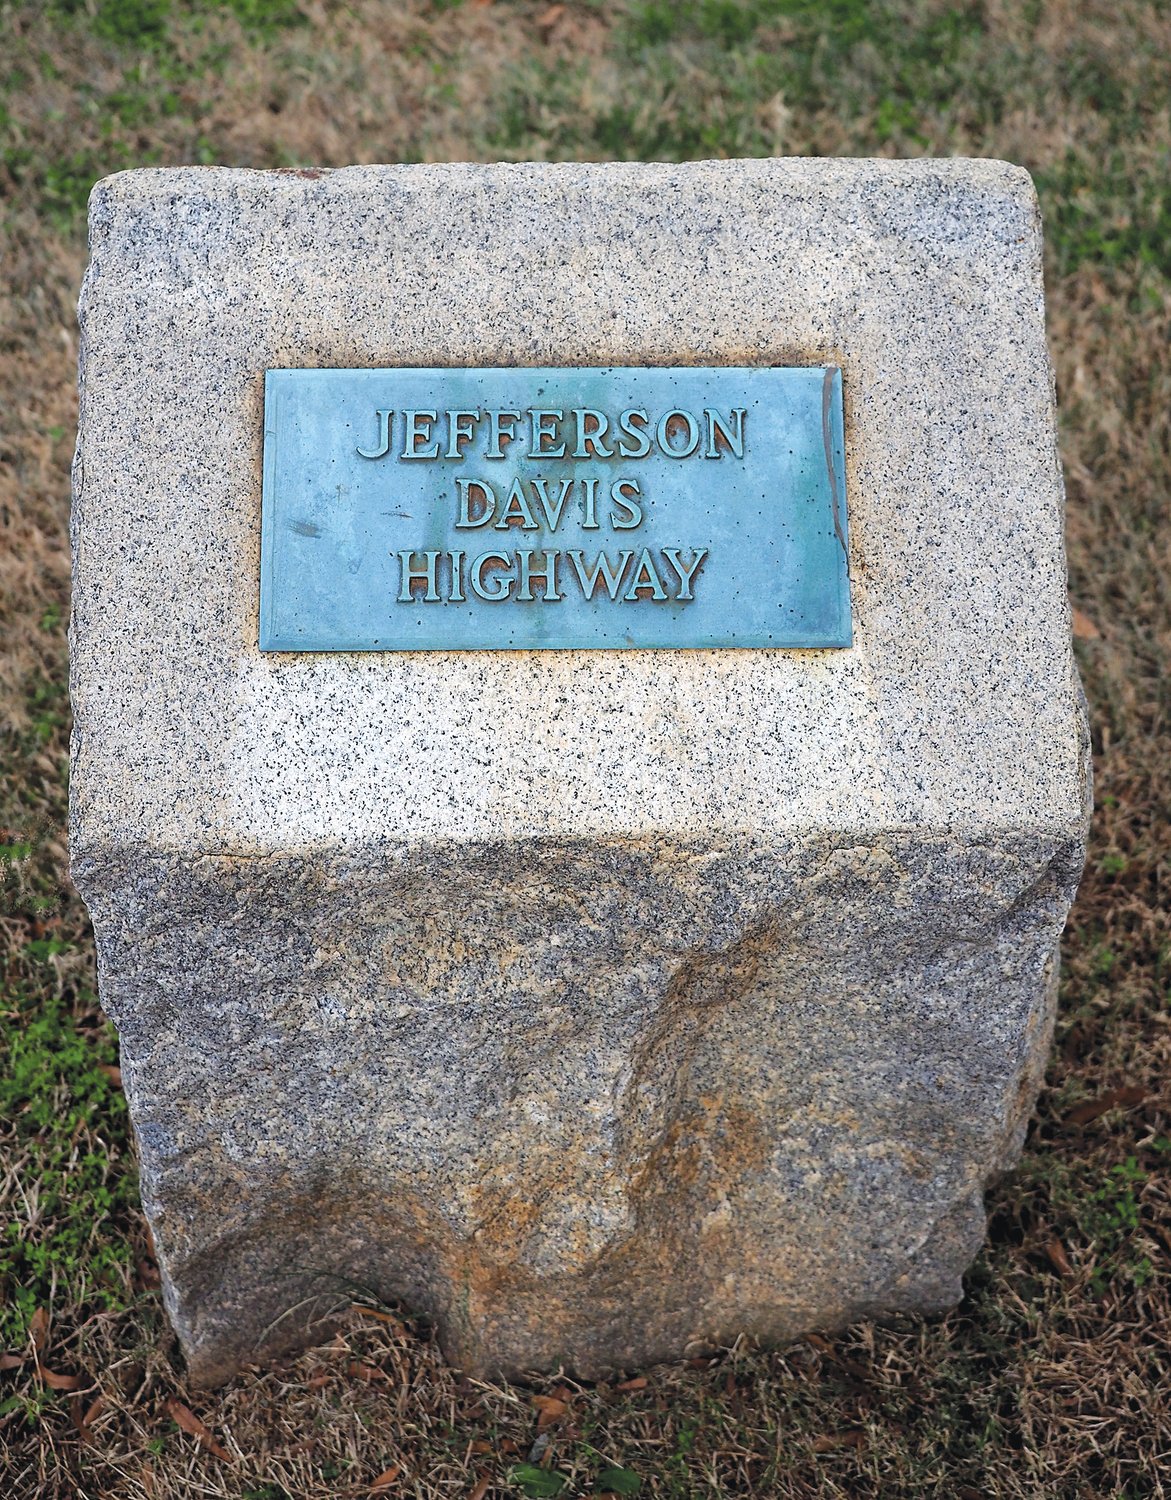 This Jefferson Davis Highway marker, which stands in front of the Chatham County Historic Courthouse, was installed by the United Daughters of the Confederacy in the 1920s. It is one of the eight remaining markers in the state.